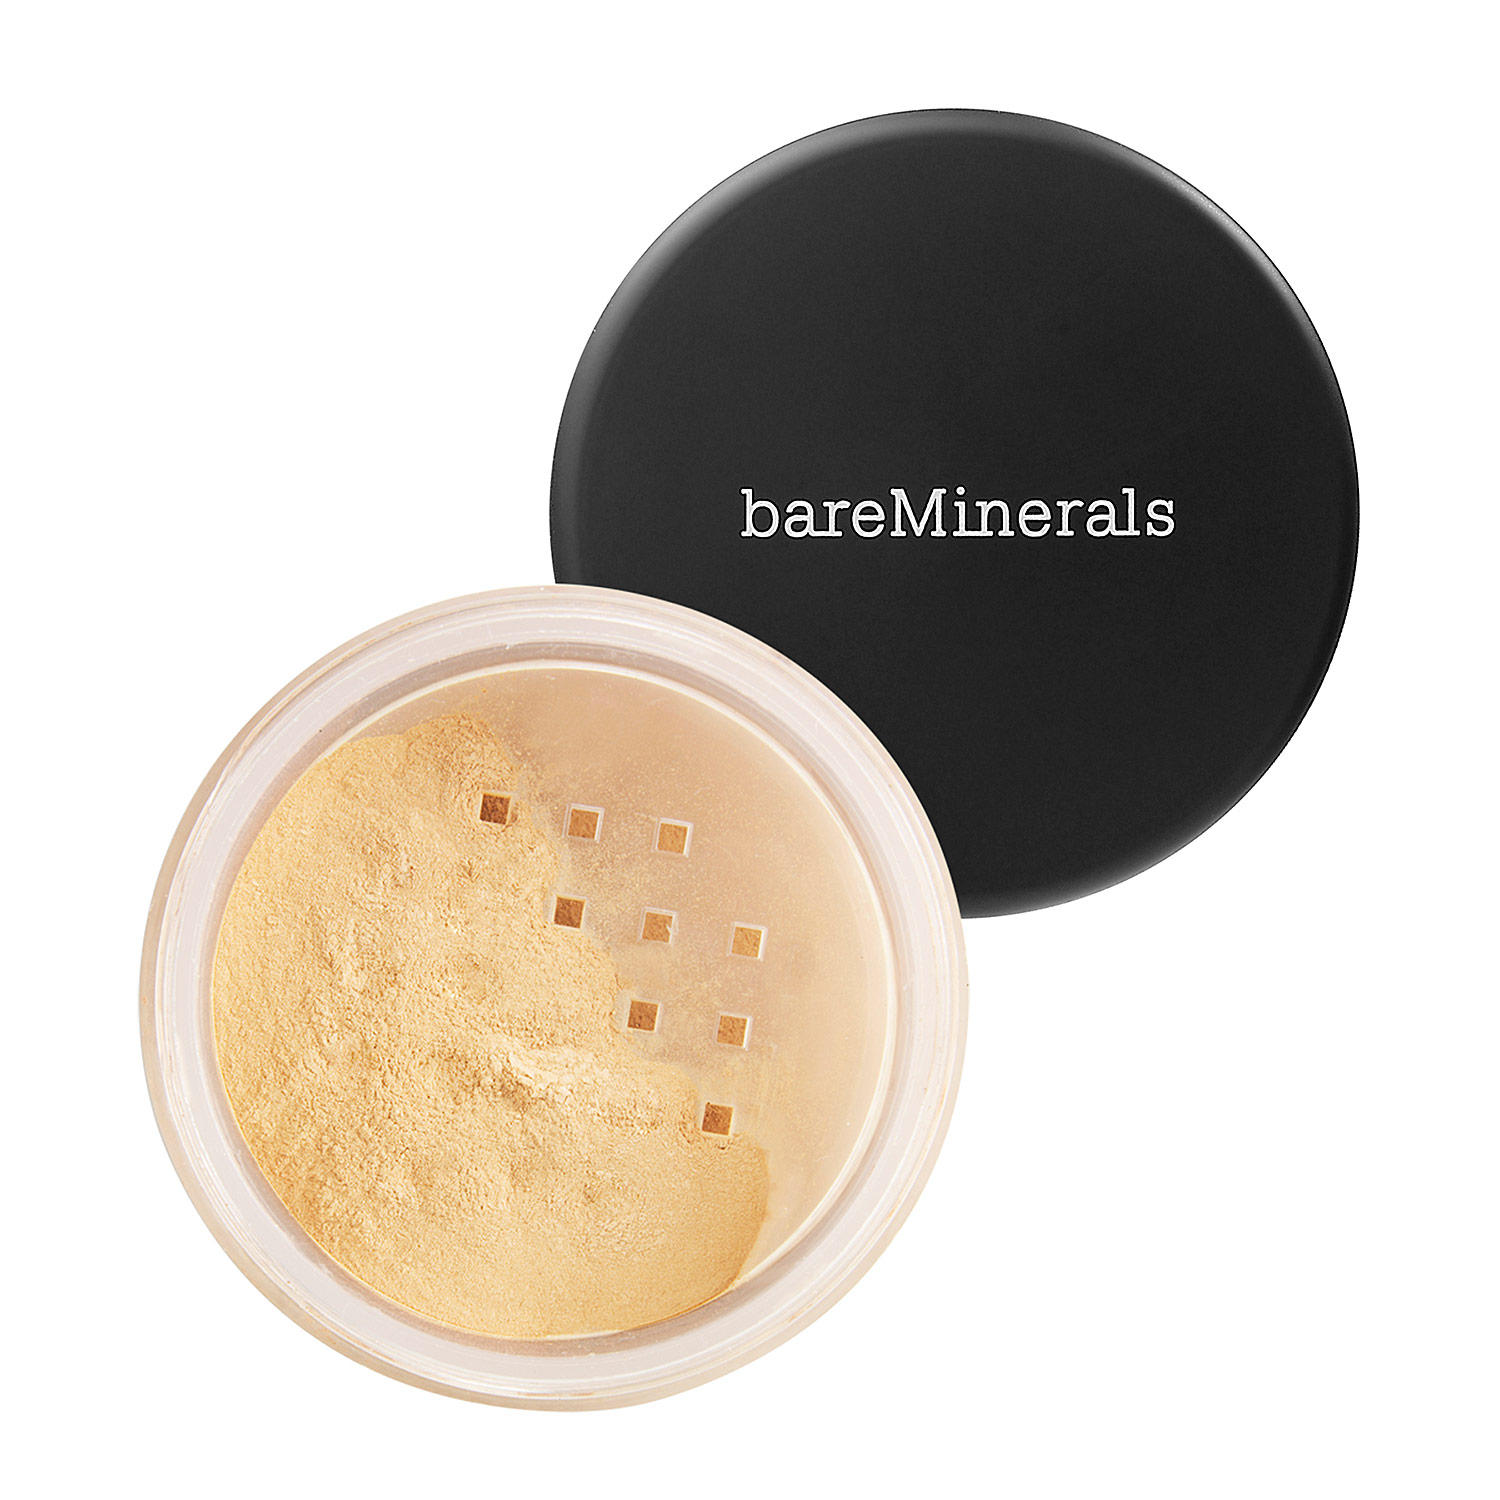 bareMinerals Broad Spectrum Multi-Tasking Face Well-Rested .85g